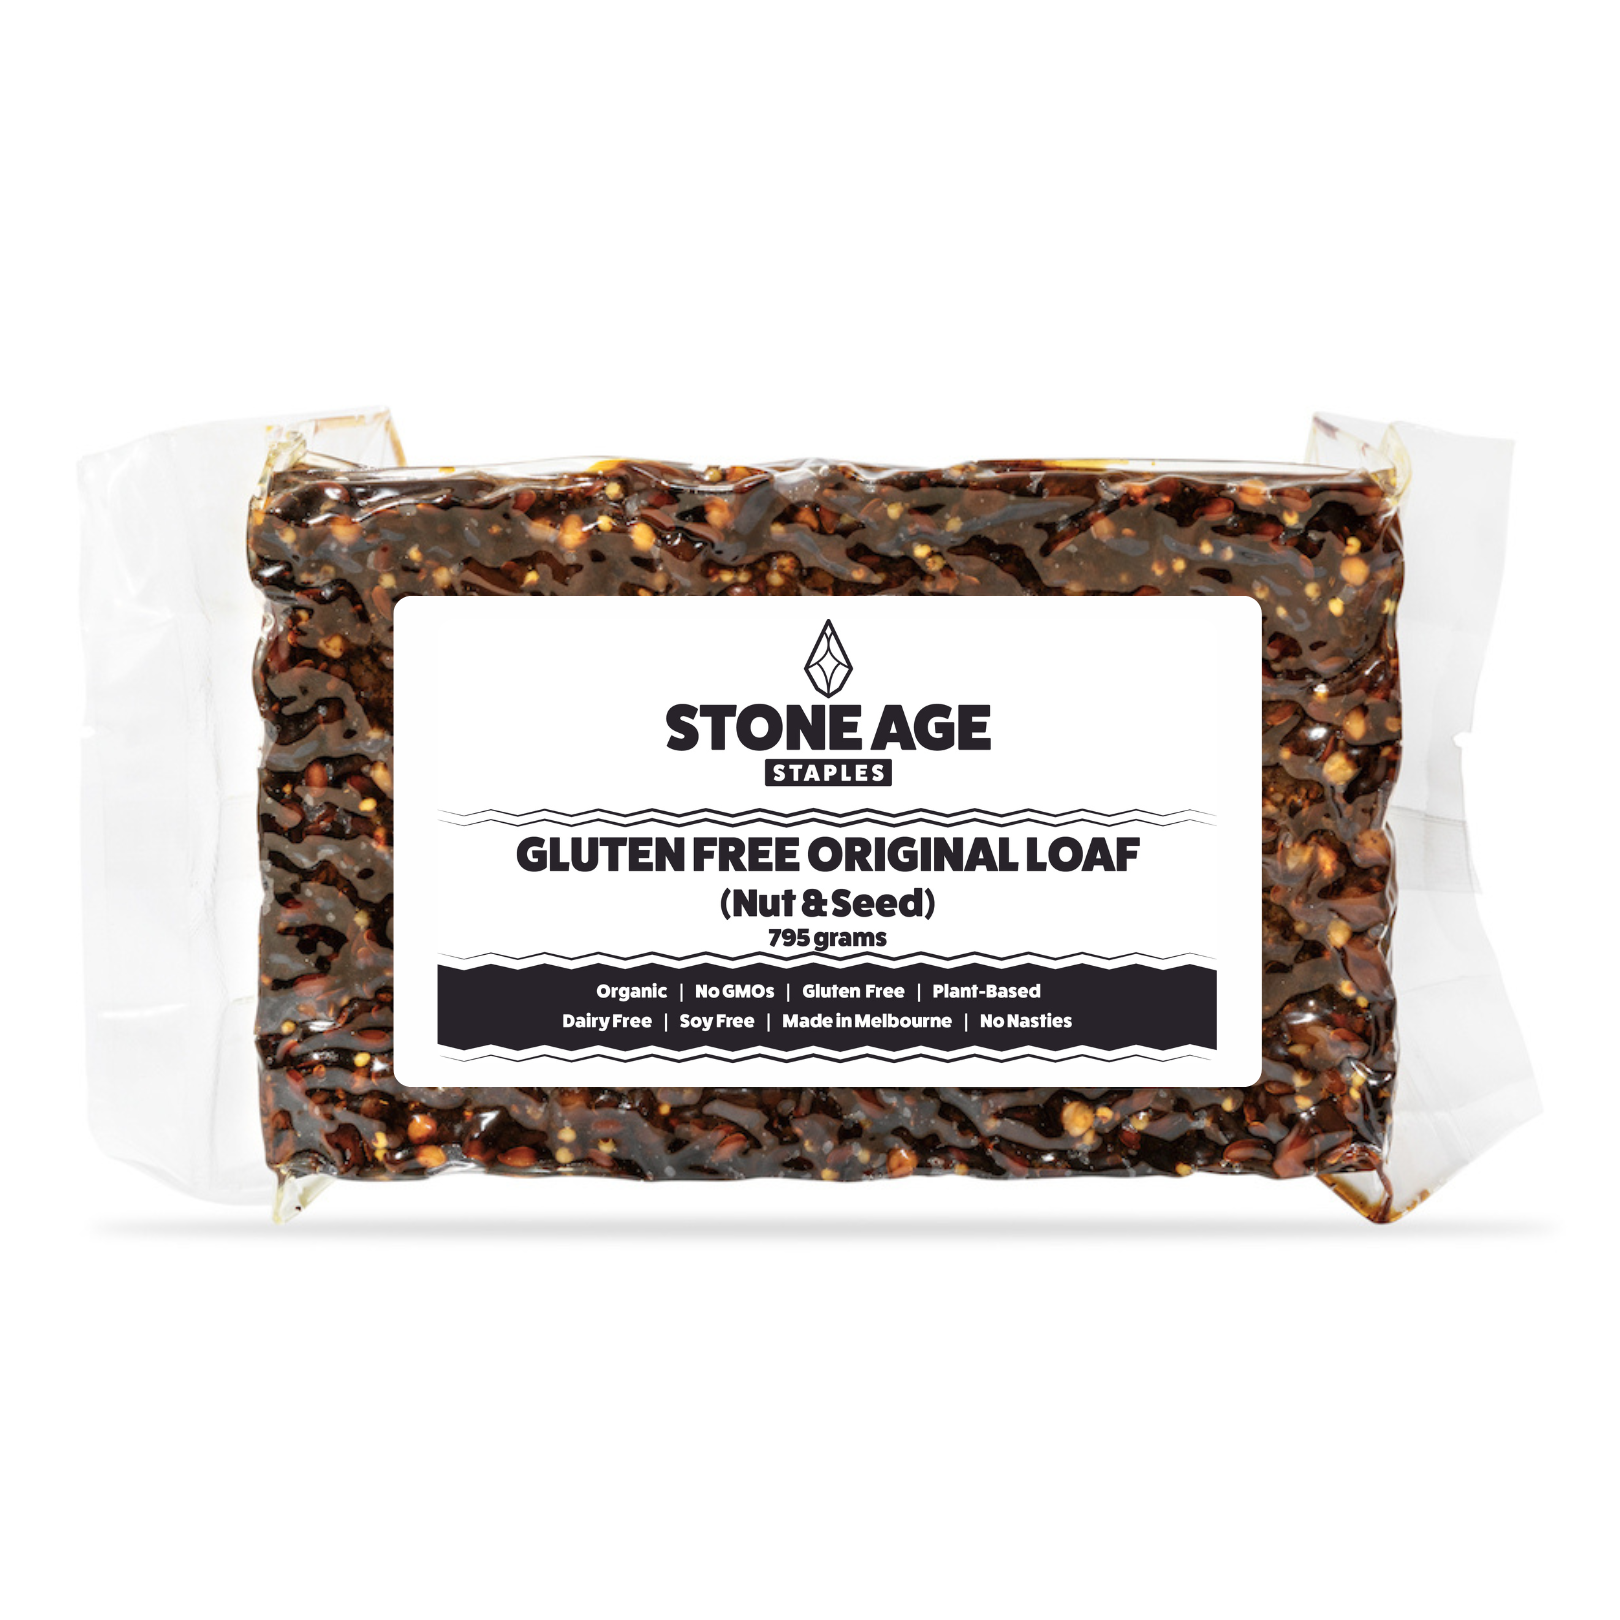 Product shot of Stone Age Staples Gluten-Free Original Loaf on a white background